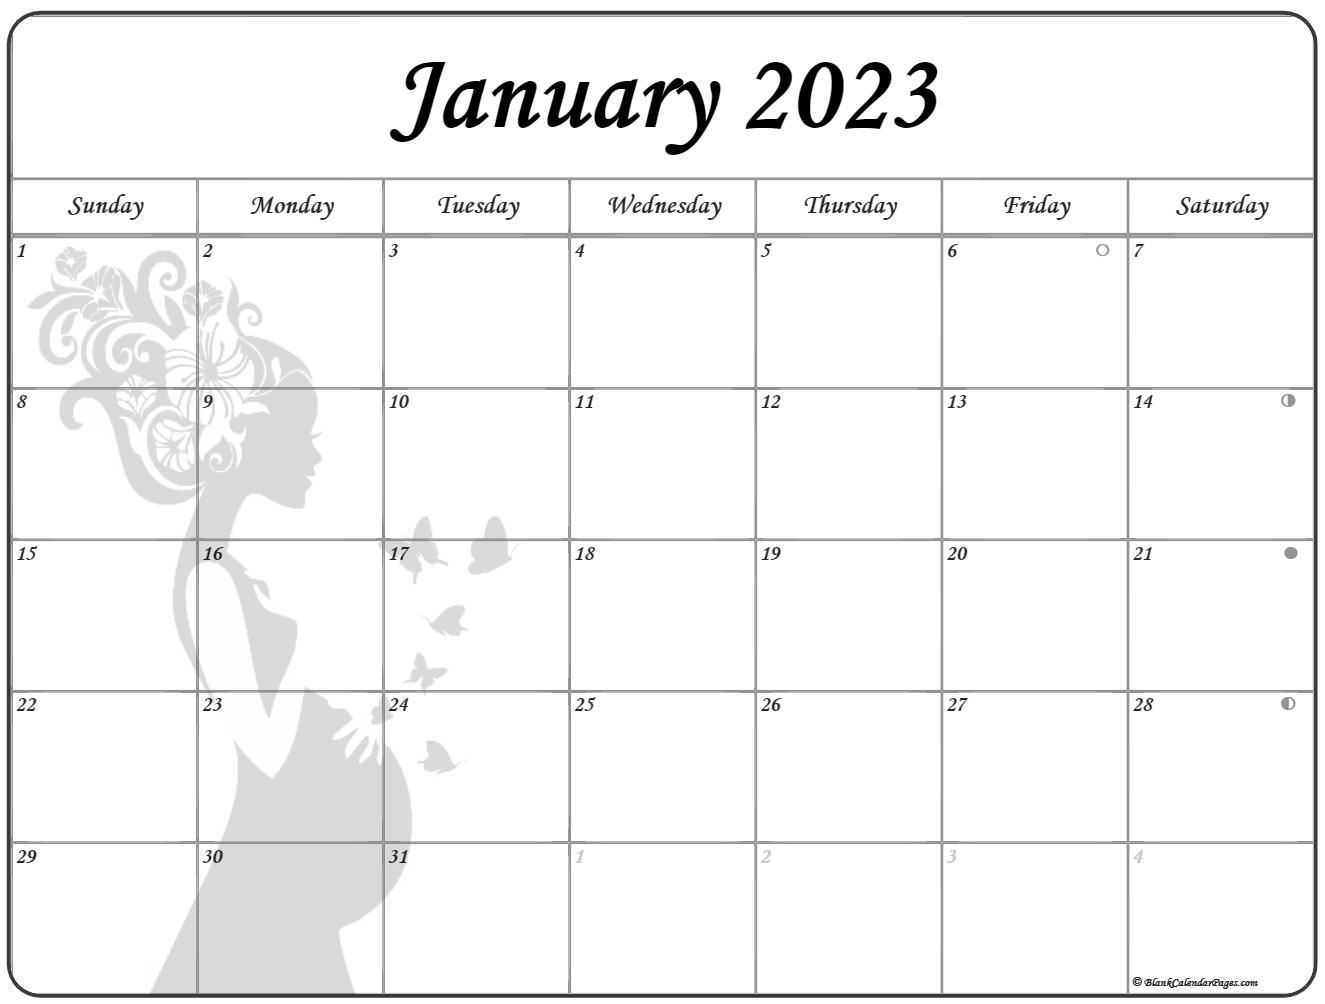 Collection Of January 2023 Photo Calendars With Image Filters. intended for March 2023 Motivational Quote Printable Clander